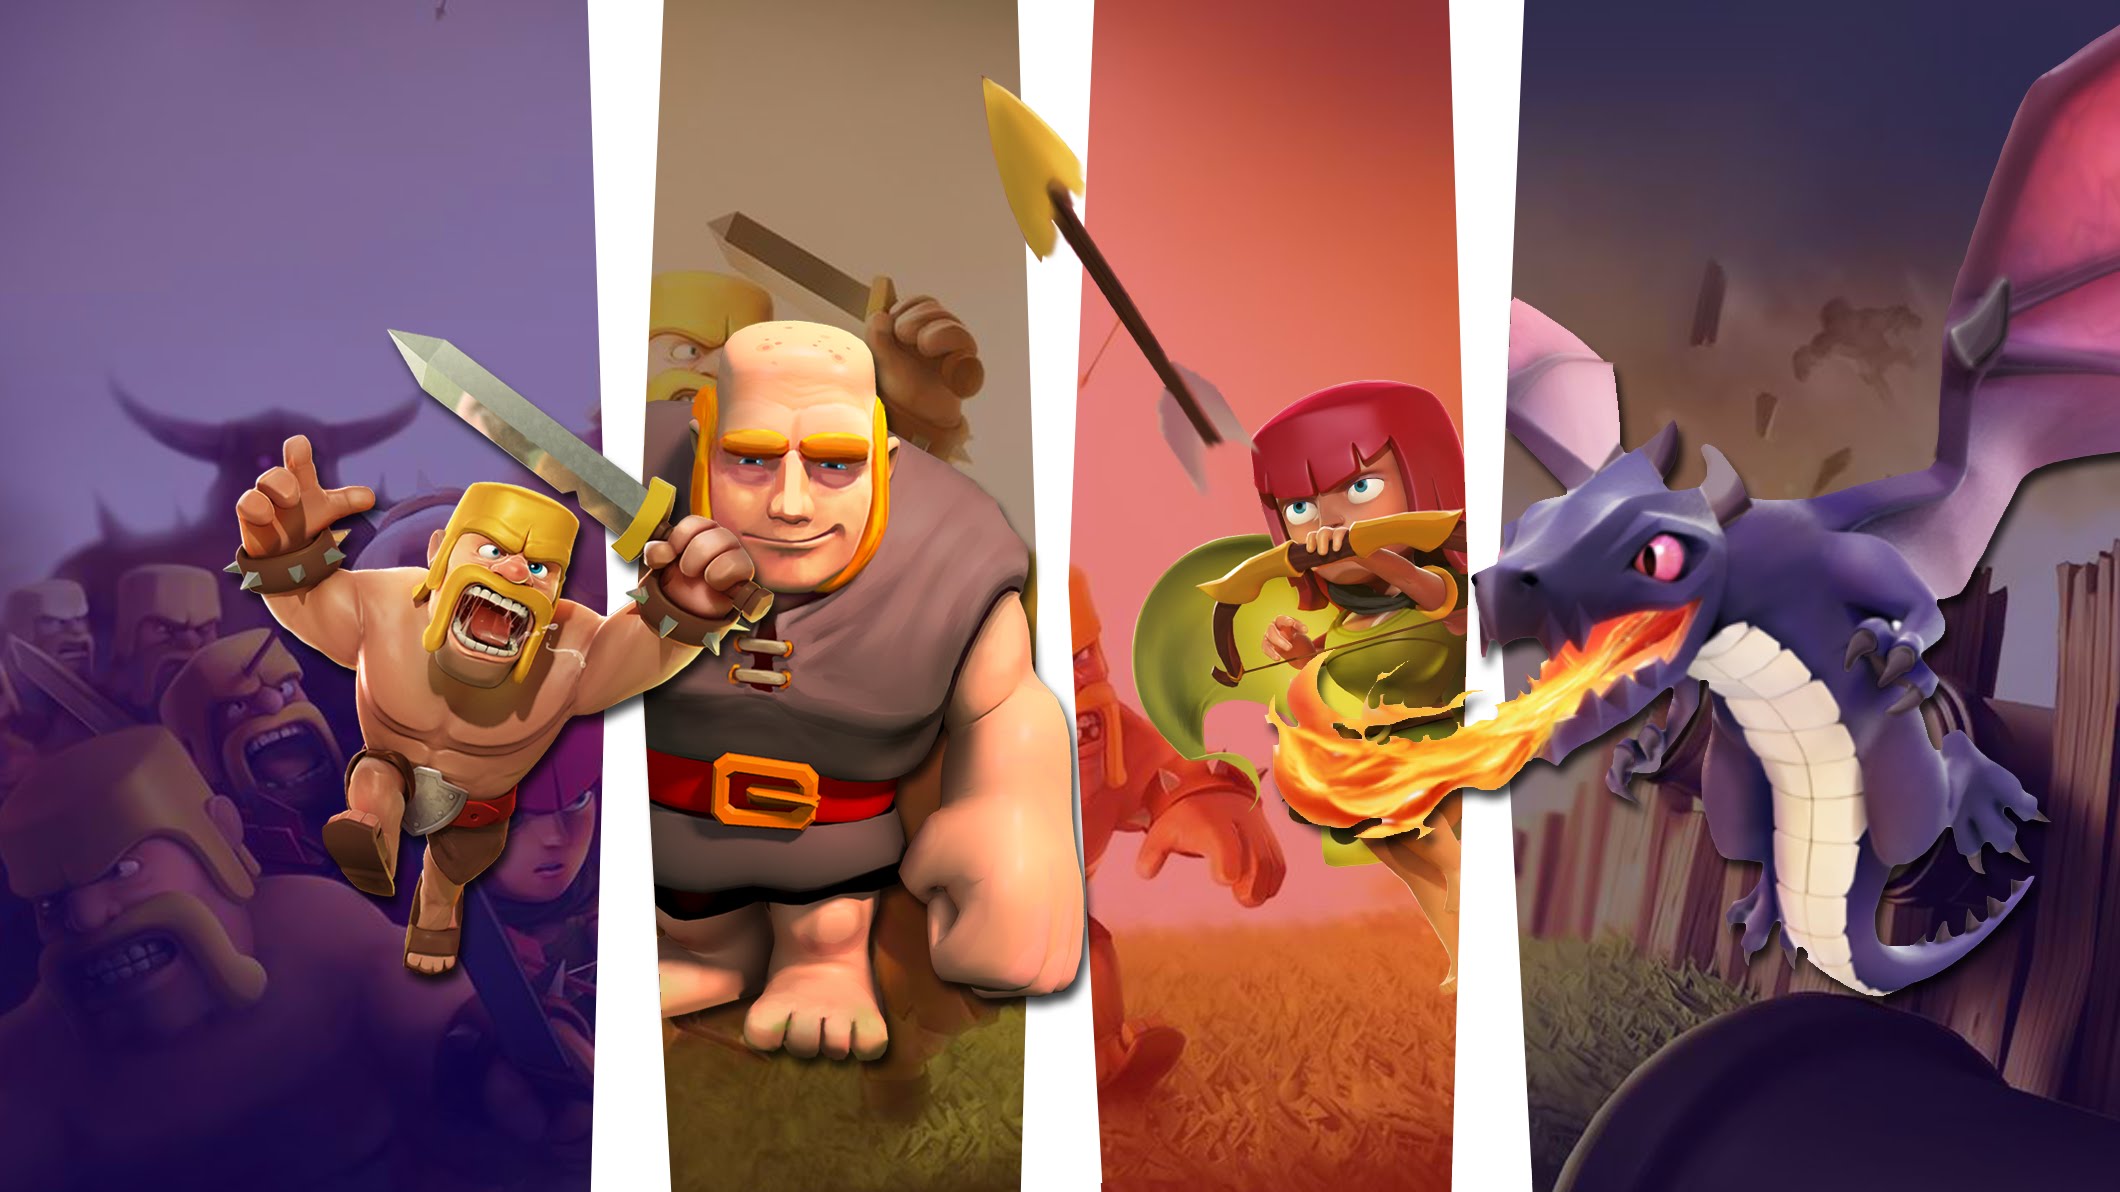 Video Game Clash of Clans HD Wallpaper | Background Image